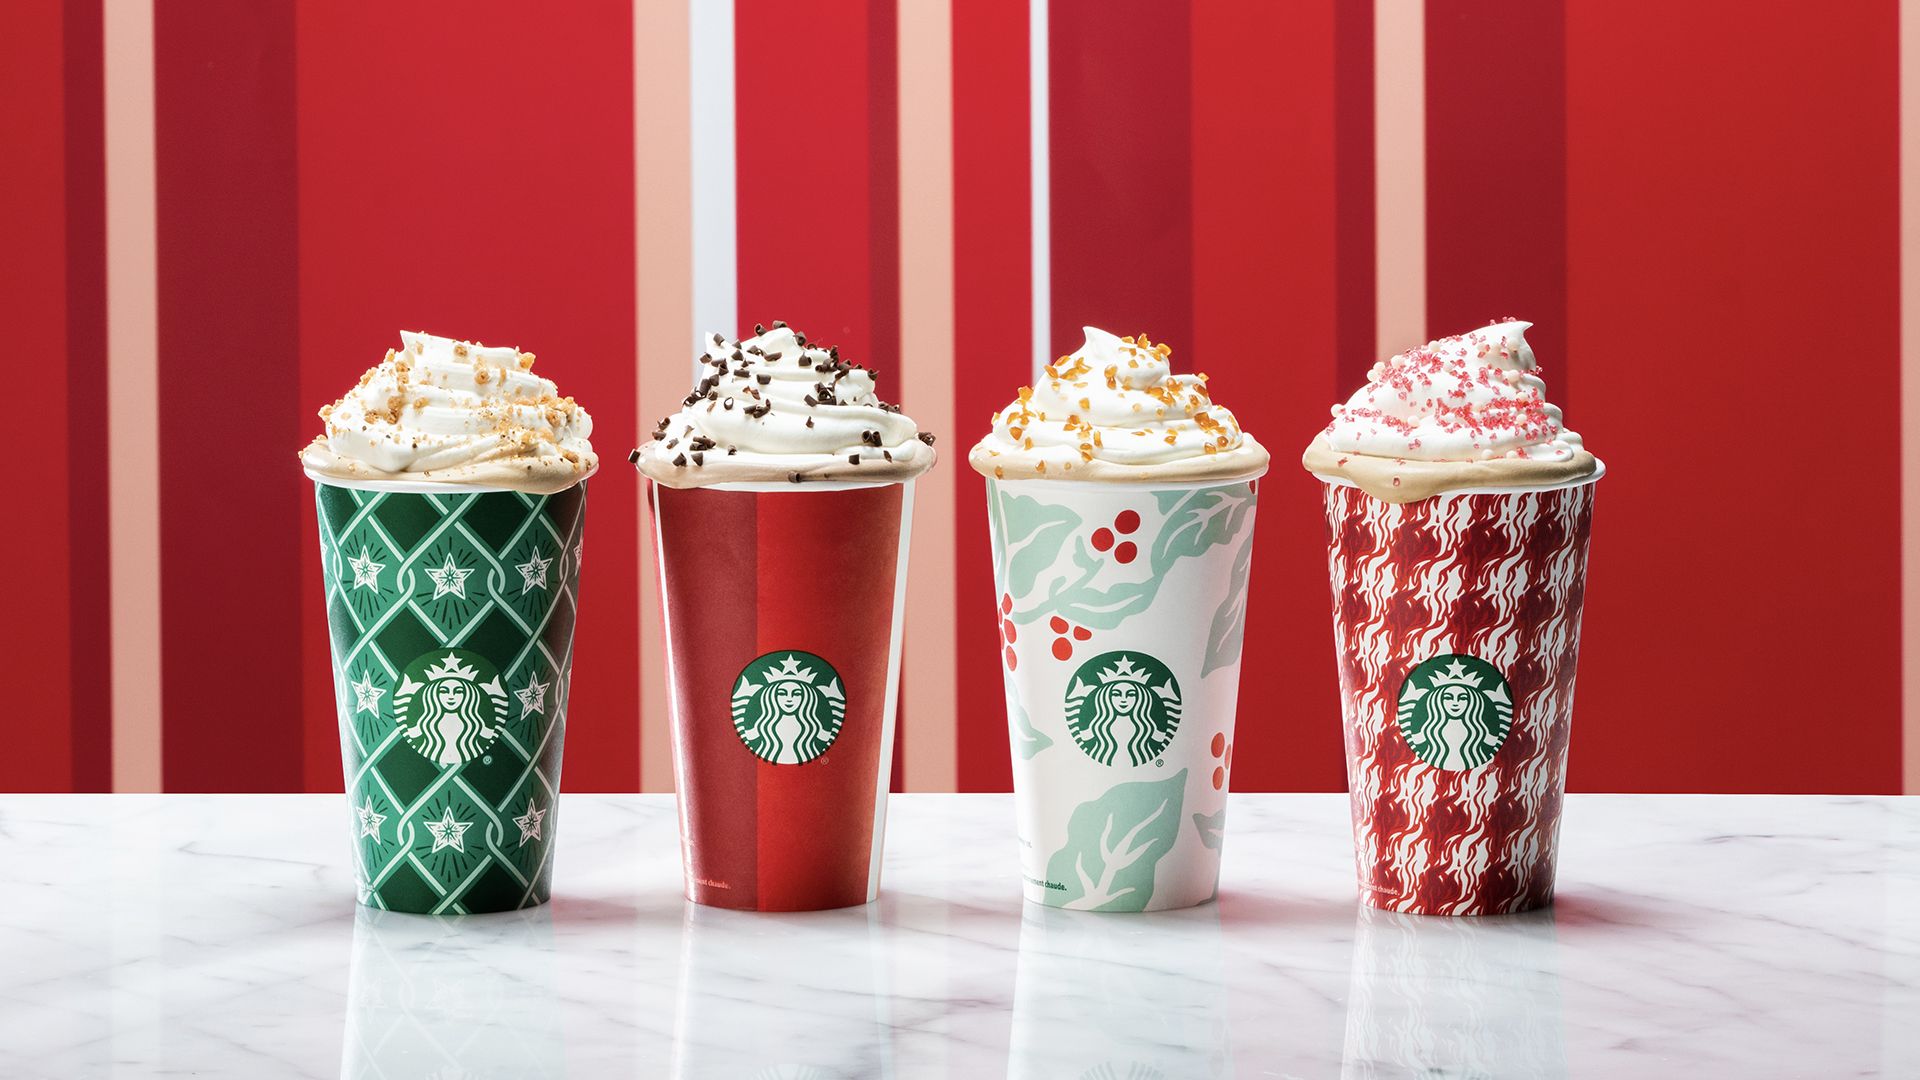 https://hips.hearstapps.com/hmg-prod/images/starbucks-holiday-2018-cups-1-1541695016.jpg?crop=0.9311348205625606xw:1xh;center,top